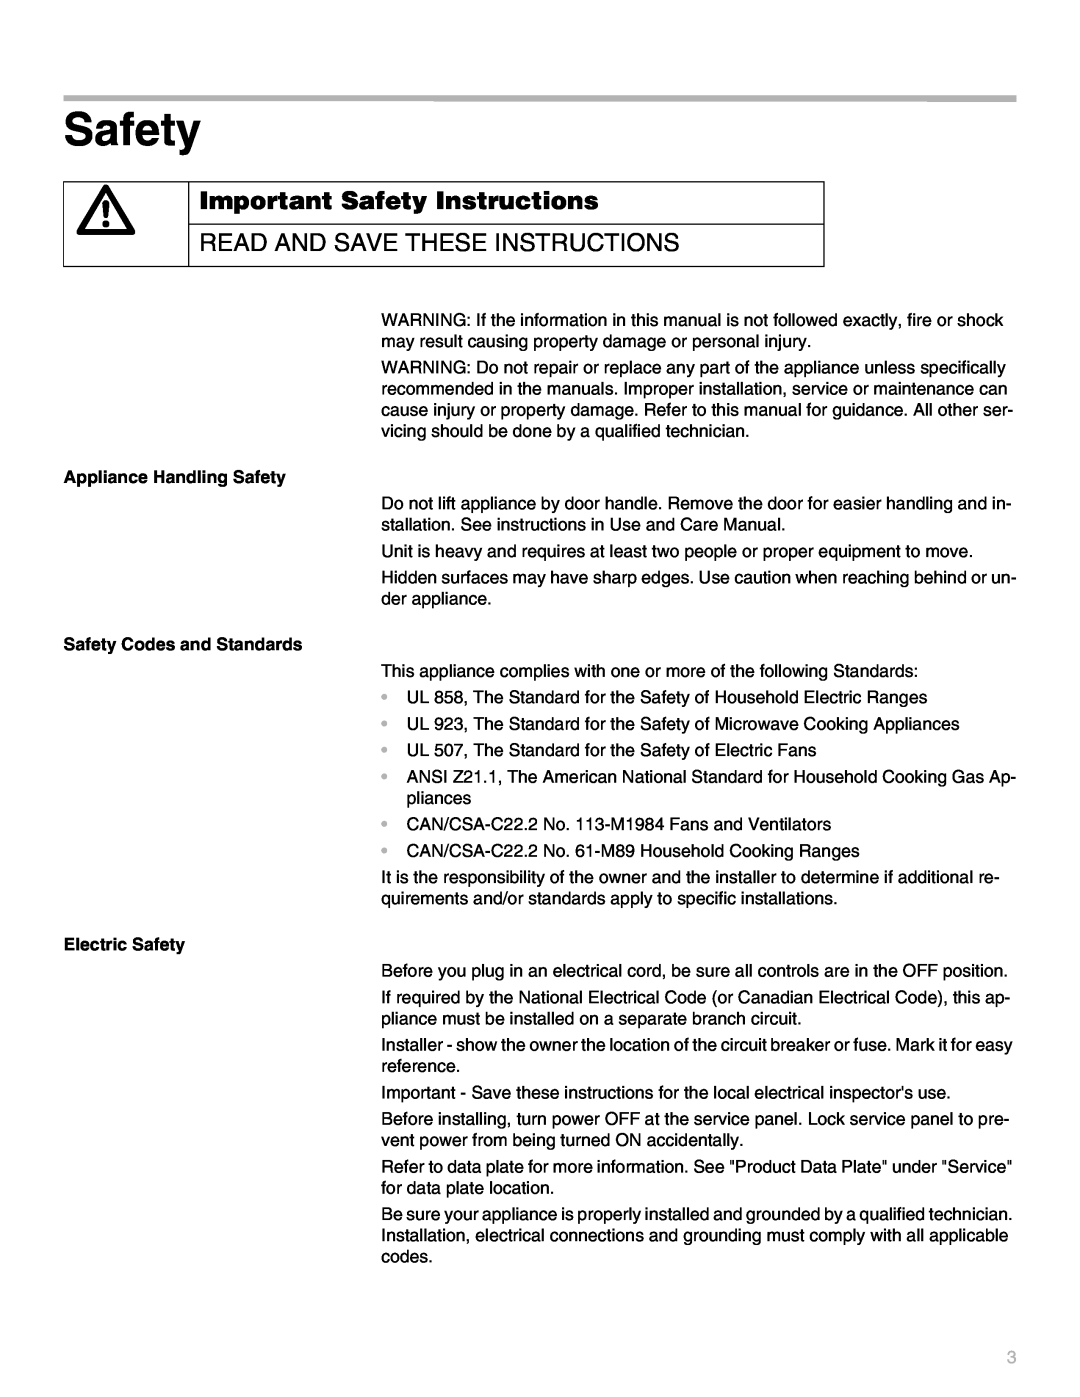 Thermador MEM301, MEW301 Important Safety Instructions, Read And Save These Instructions, Appliance Handling Safety 